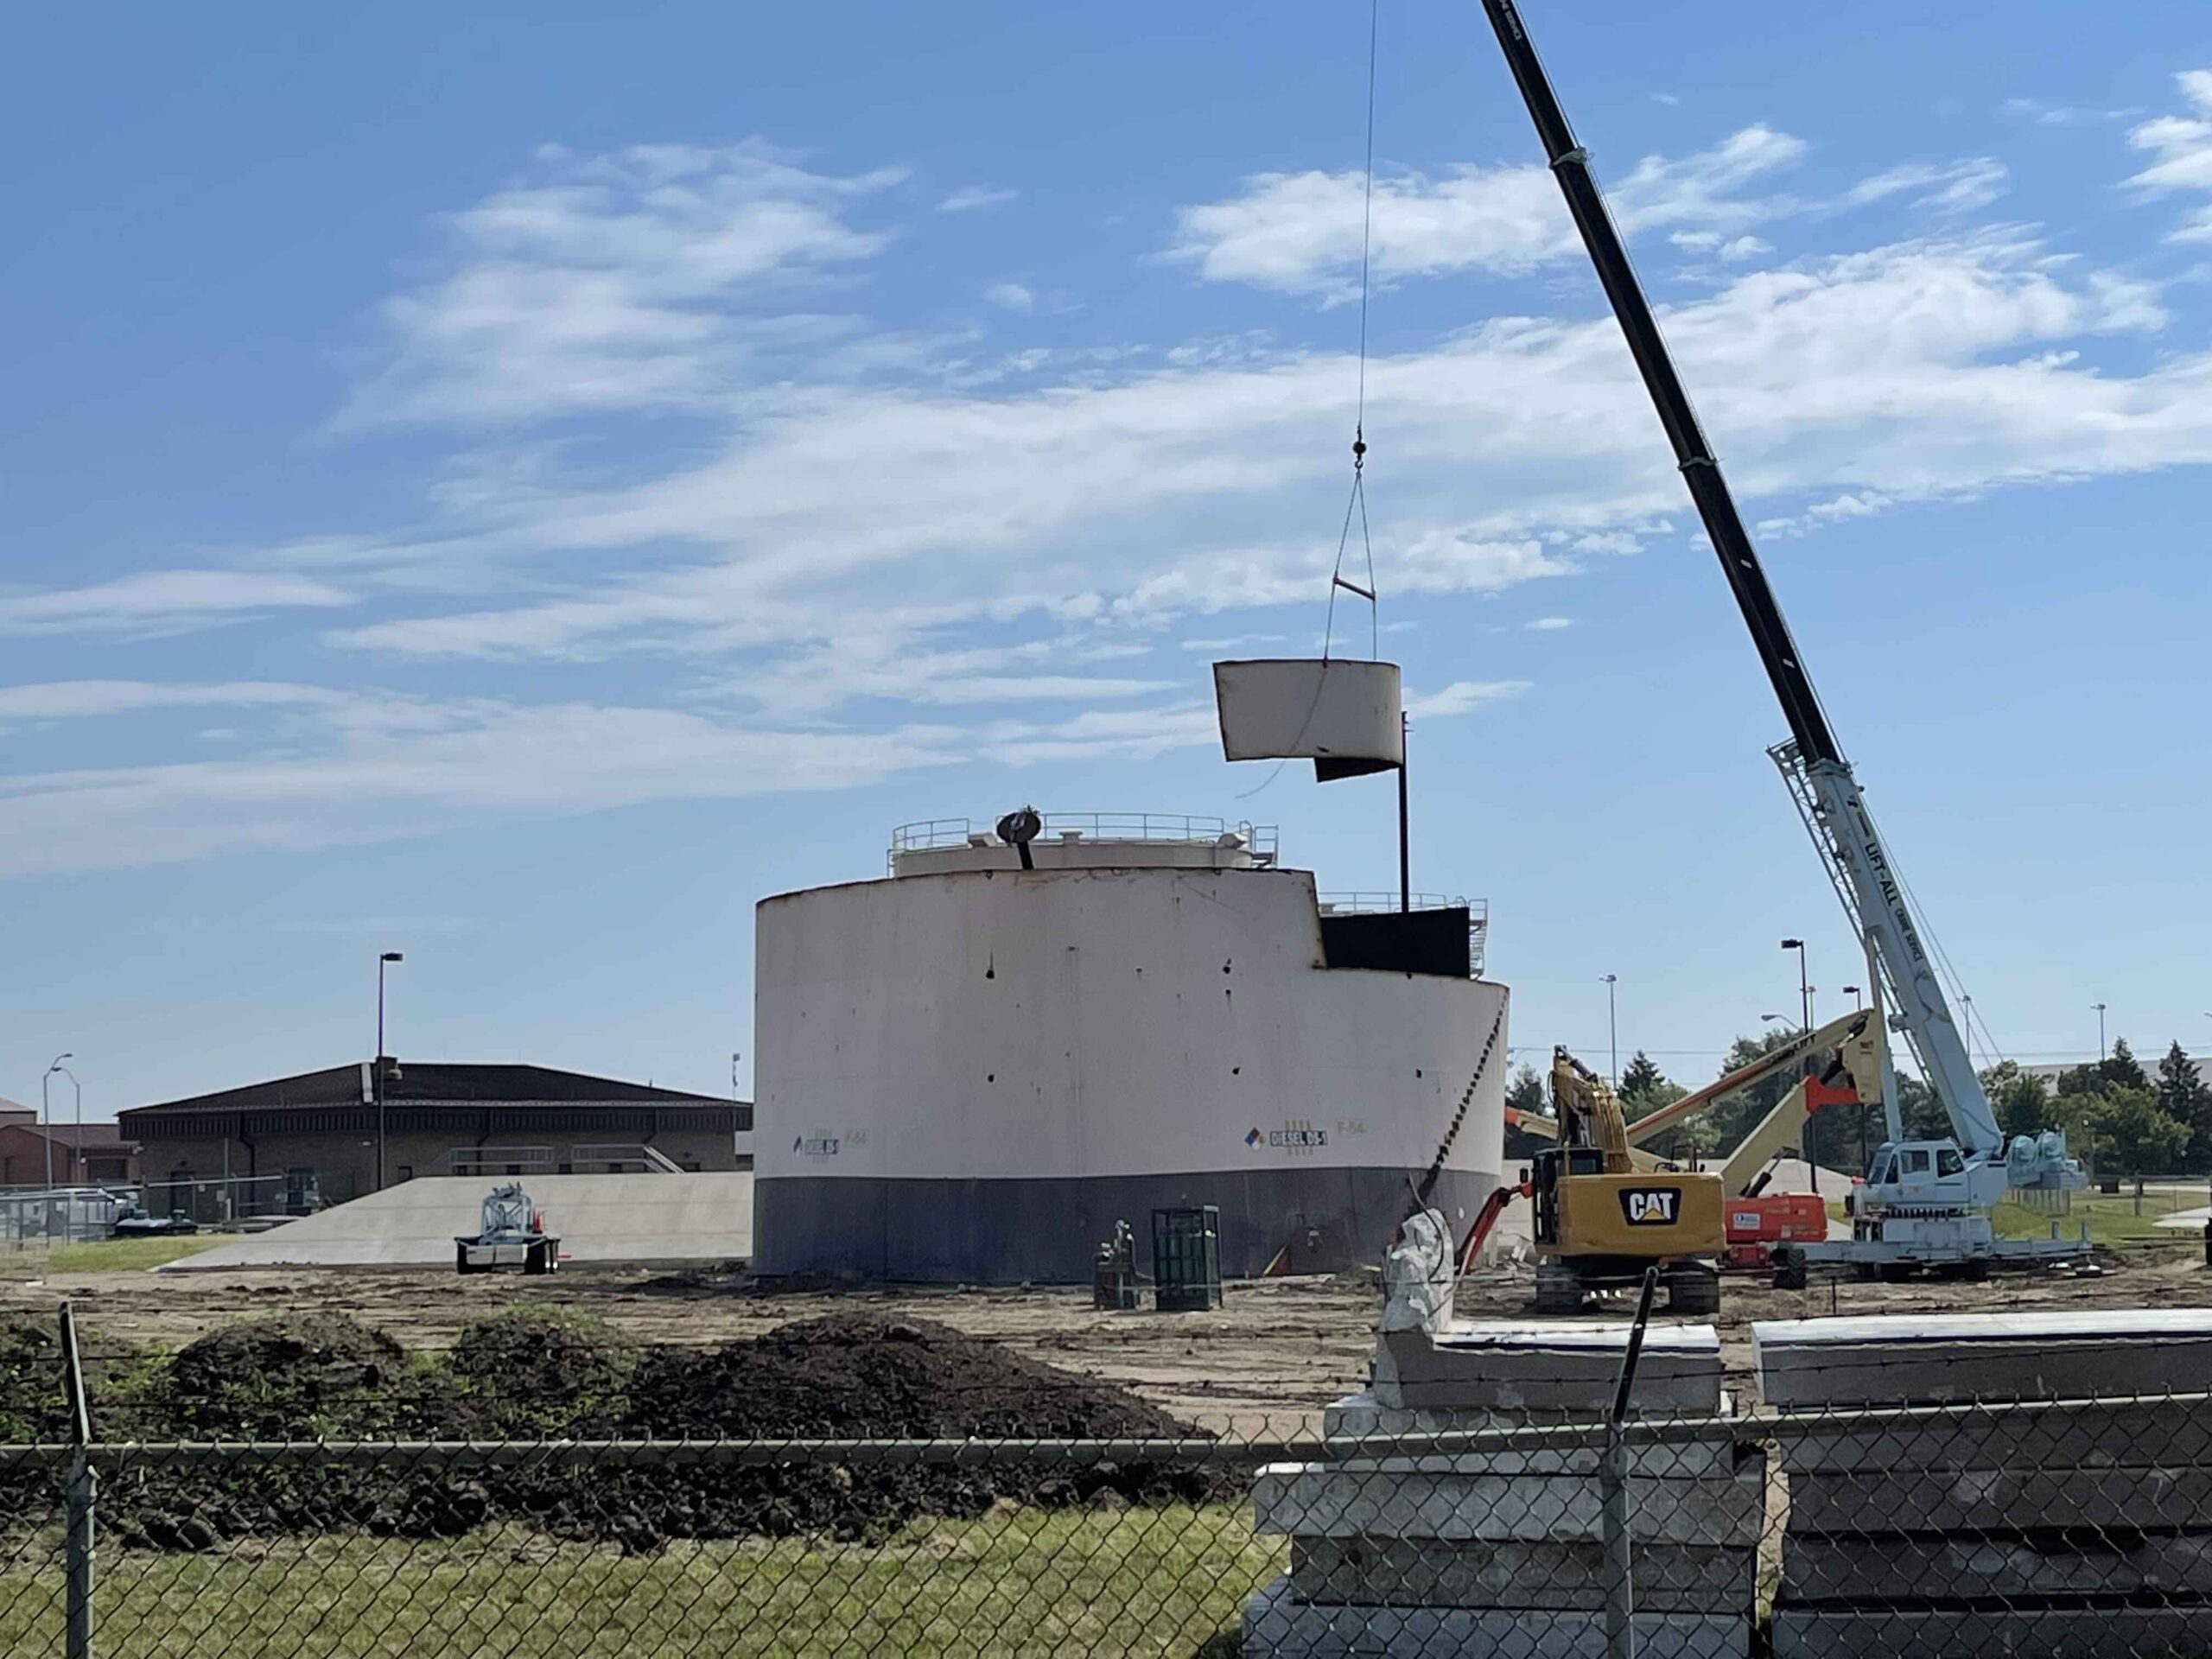 A large, cylindrical storage tank is being hoisted by a crane at Offutt Air Force Base under a clear sky.